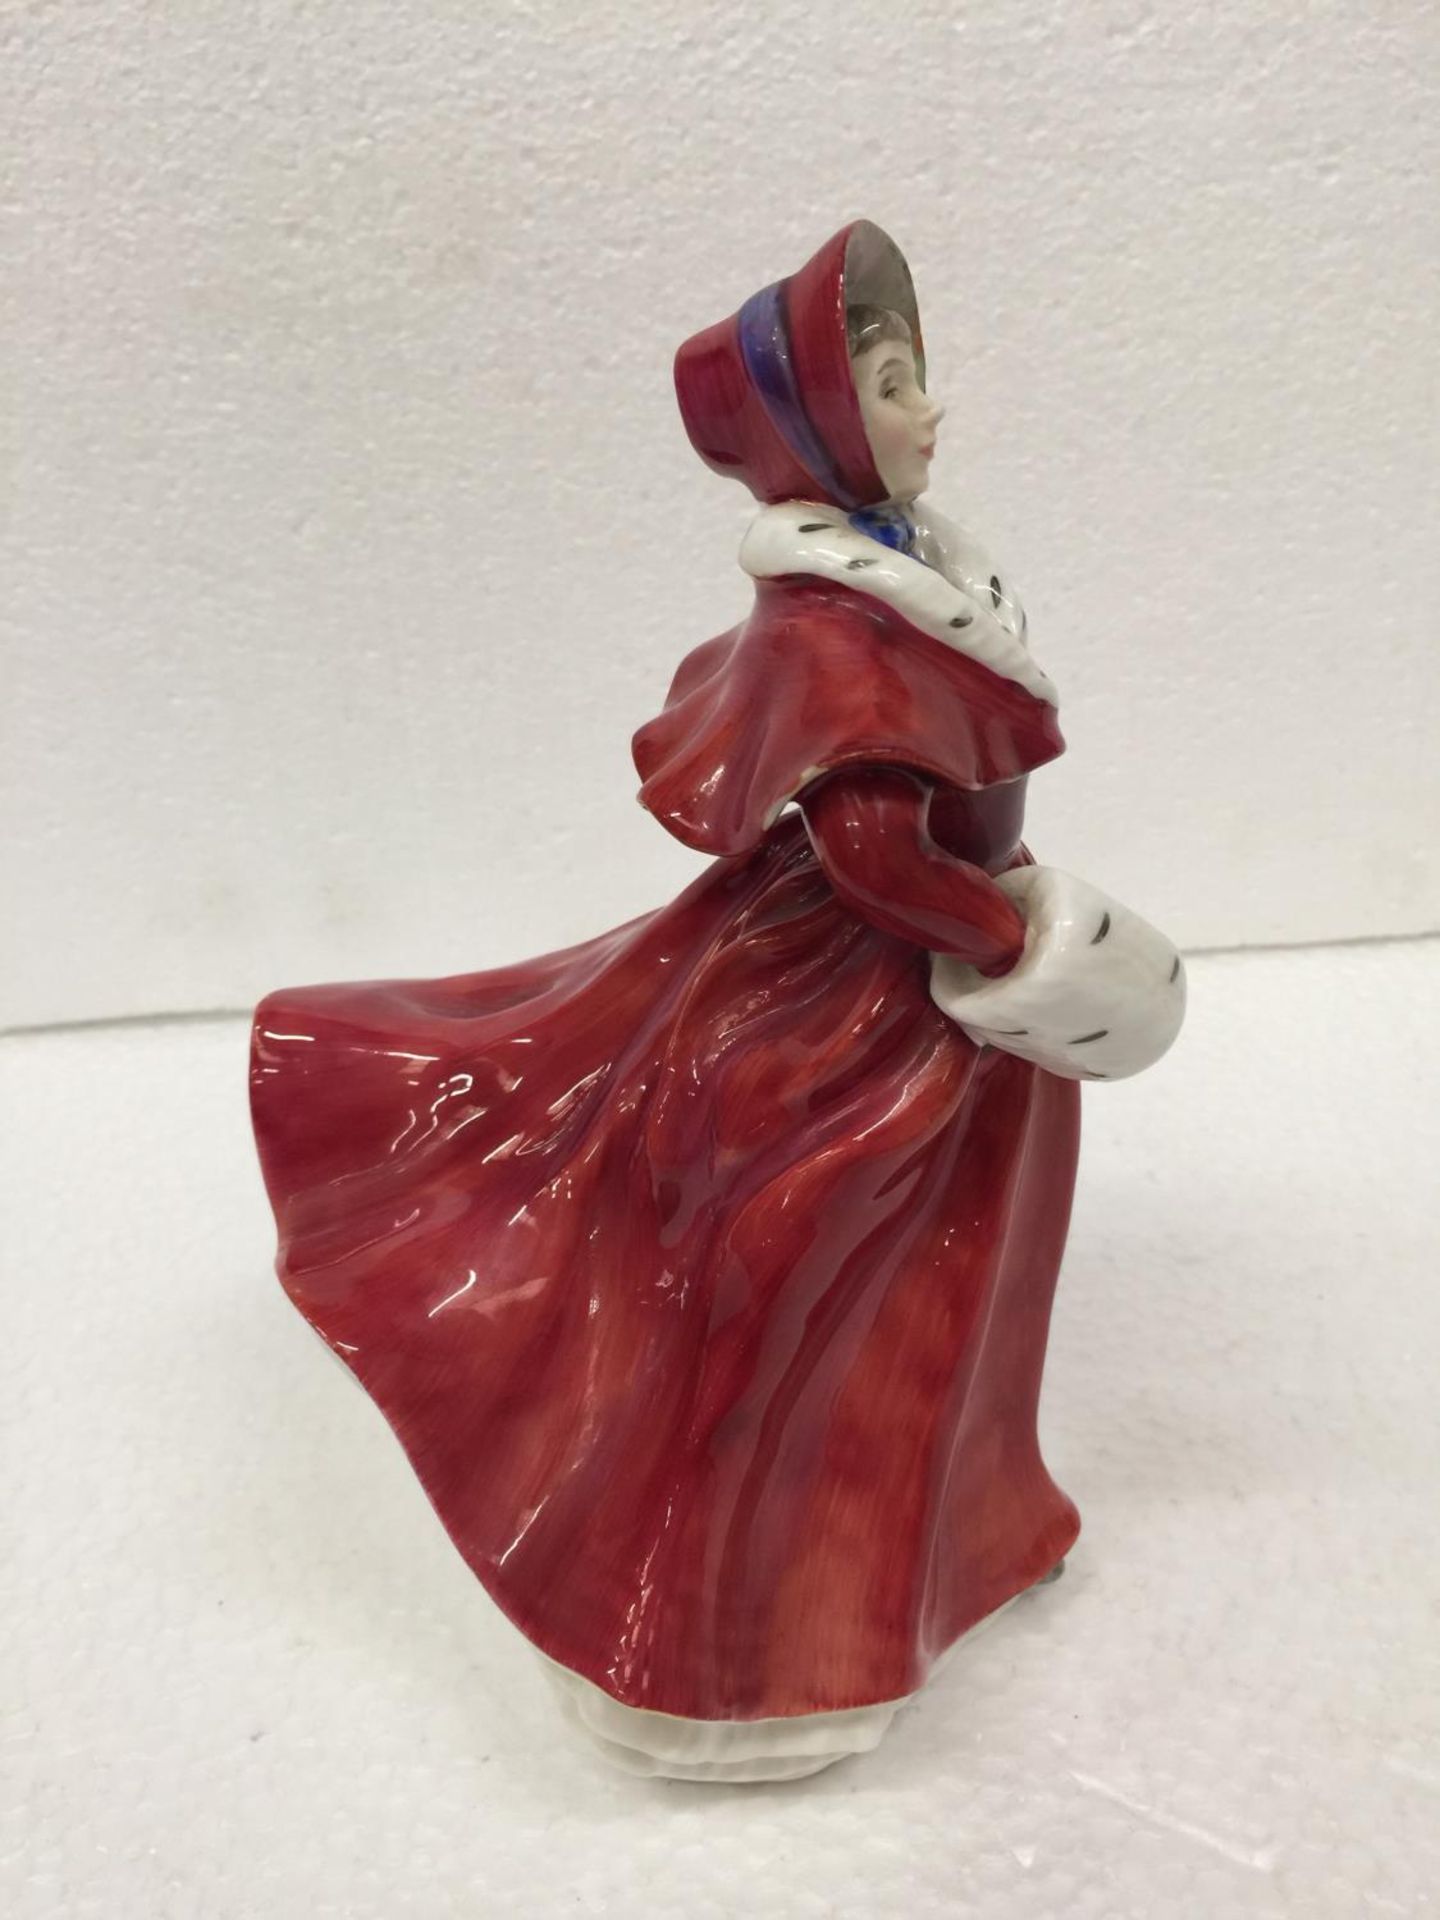 A ROYAL DOULTON FIGURE 'THE SKATER' HN 3439 - Image 2 of 5